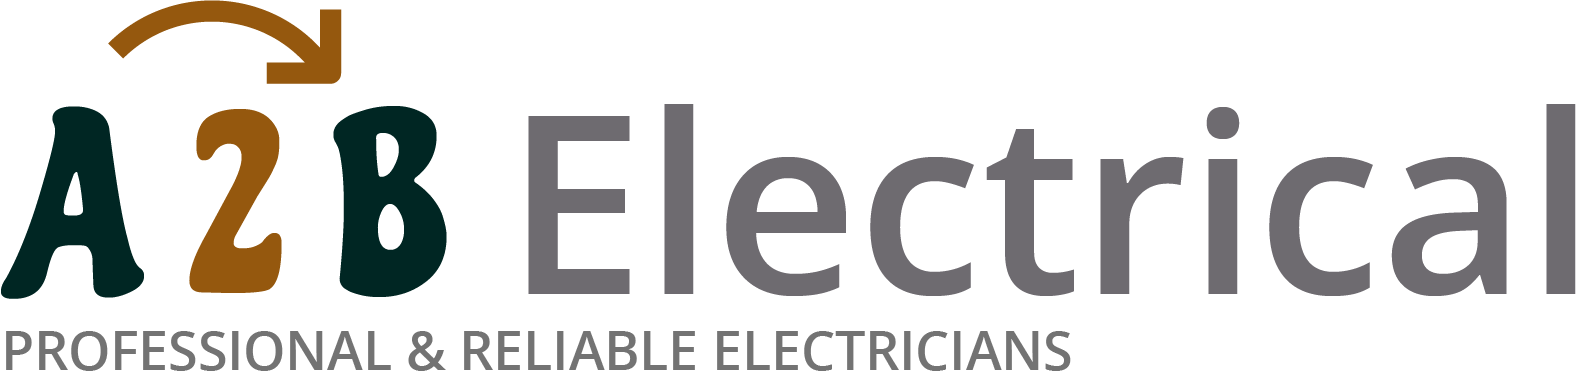 If you have electrical wiring problems in Chard, we can provide an electrician to have a look for you. 